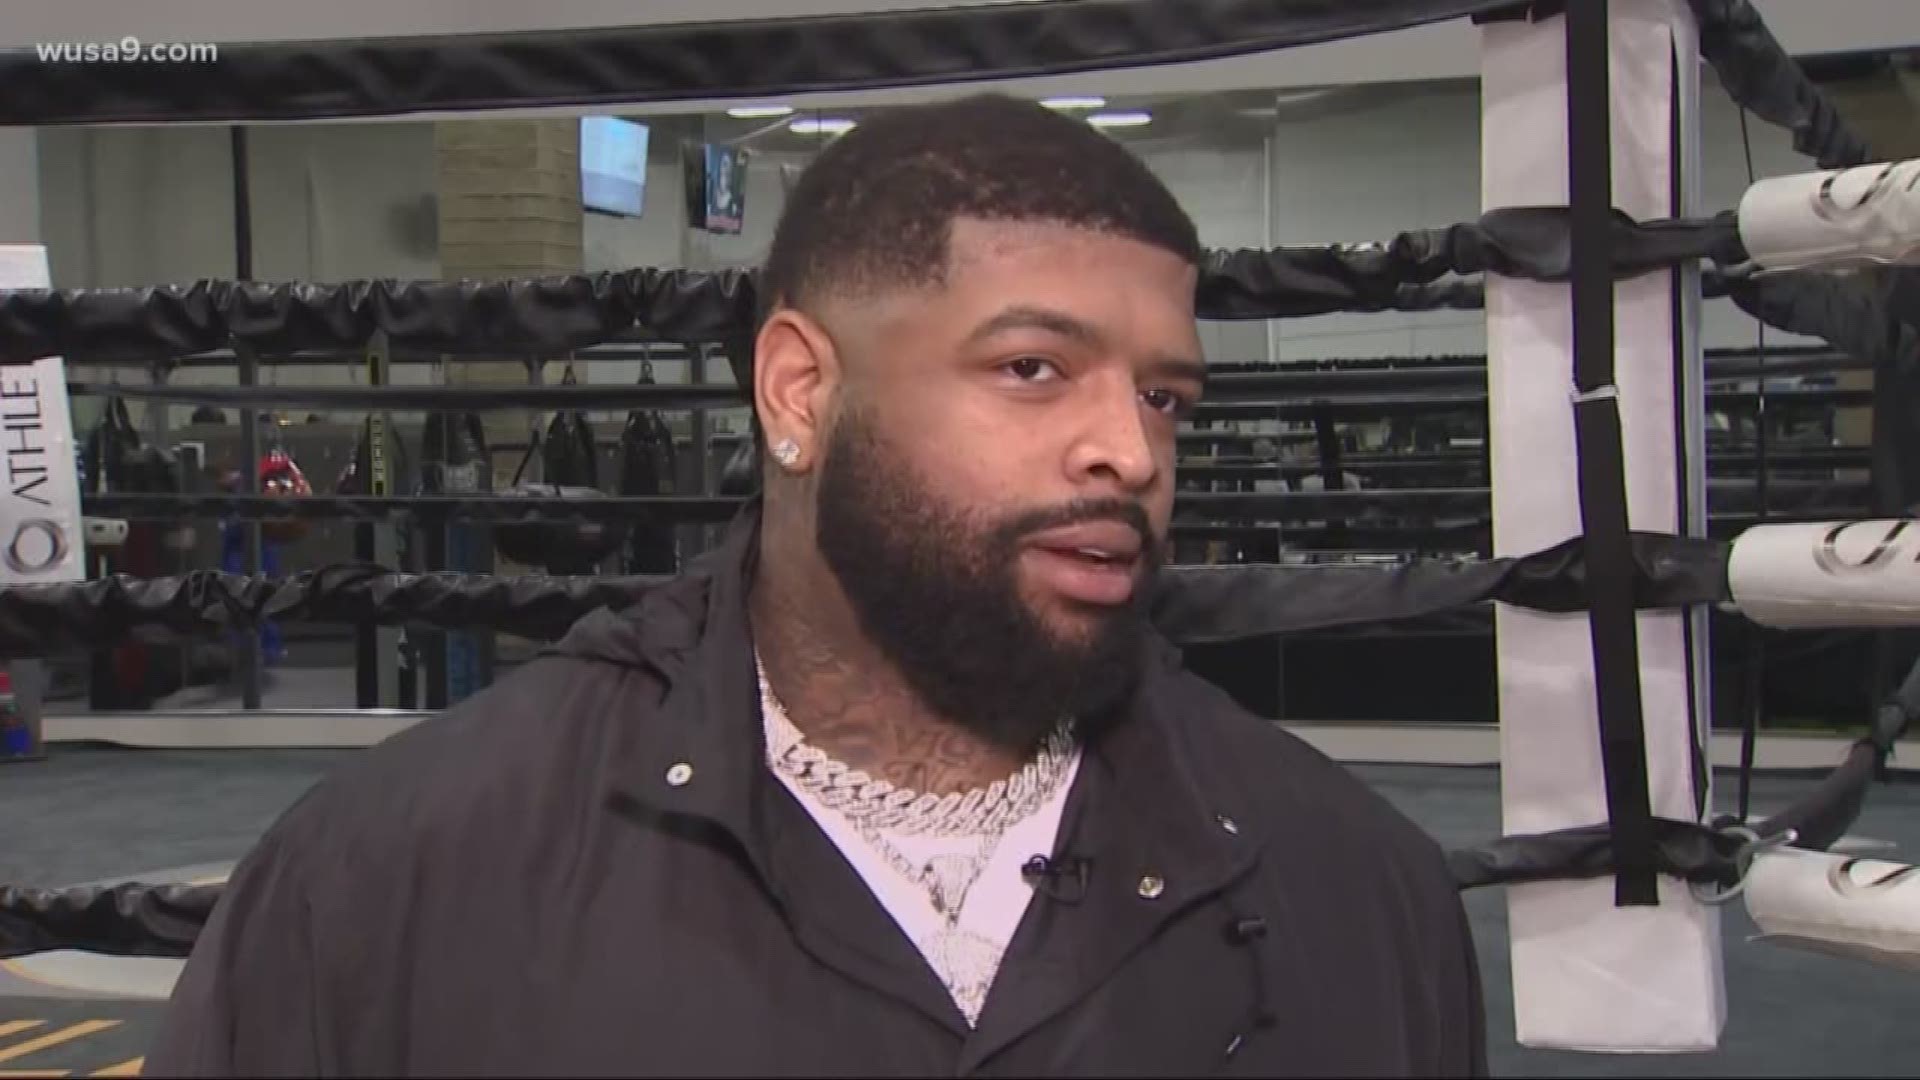 Trent Williams, who hasn't played for the Redskins all season, talks about the next step in his NFL career.